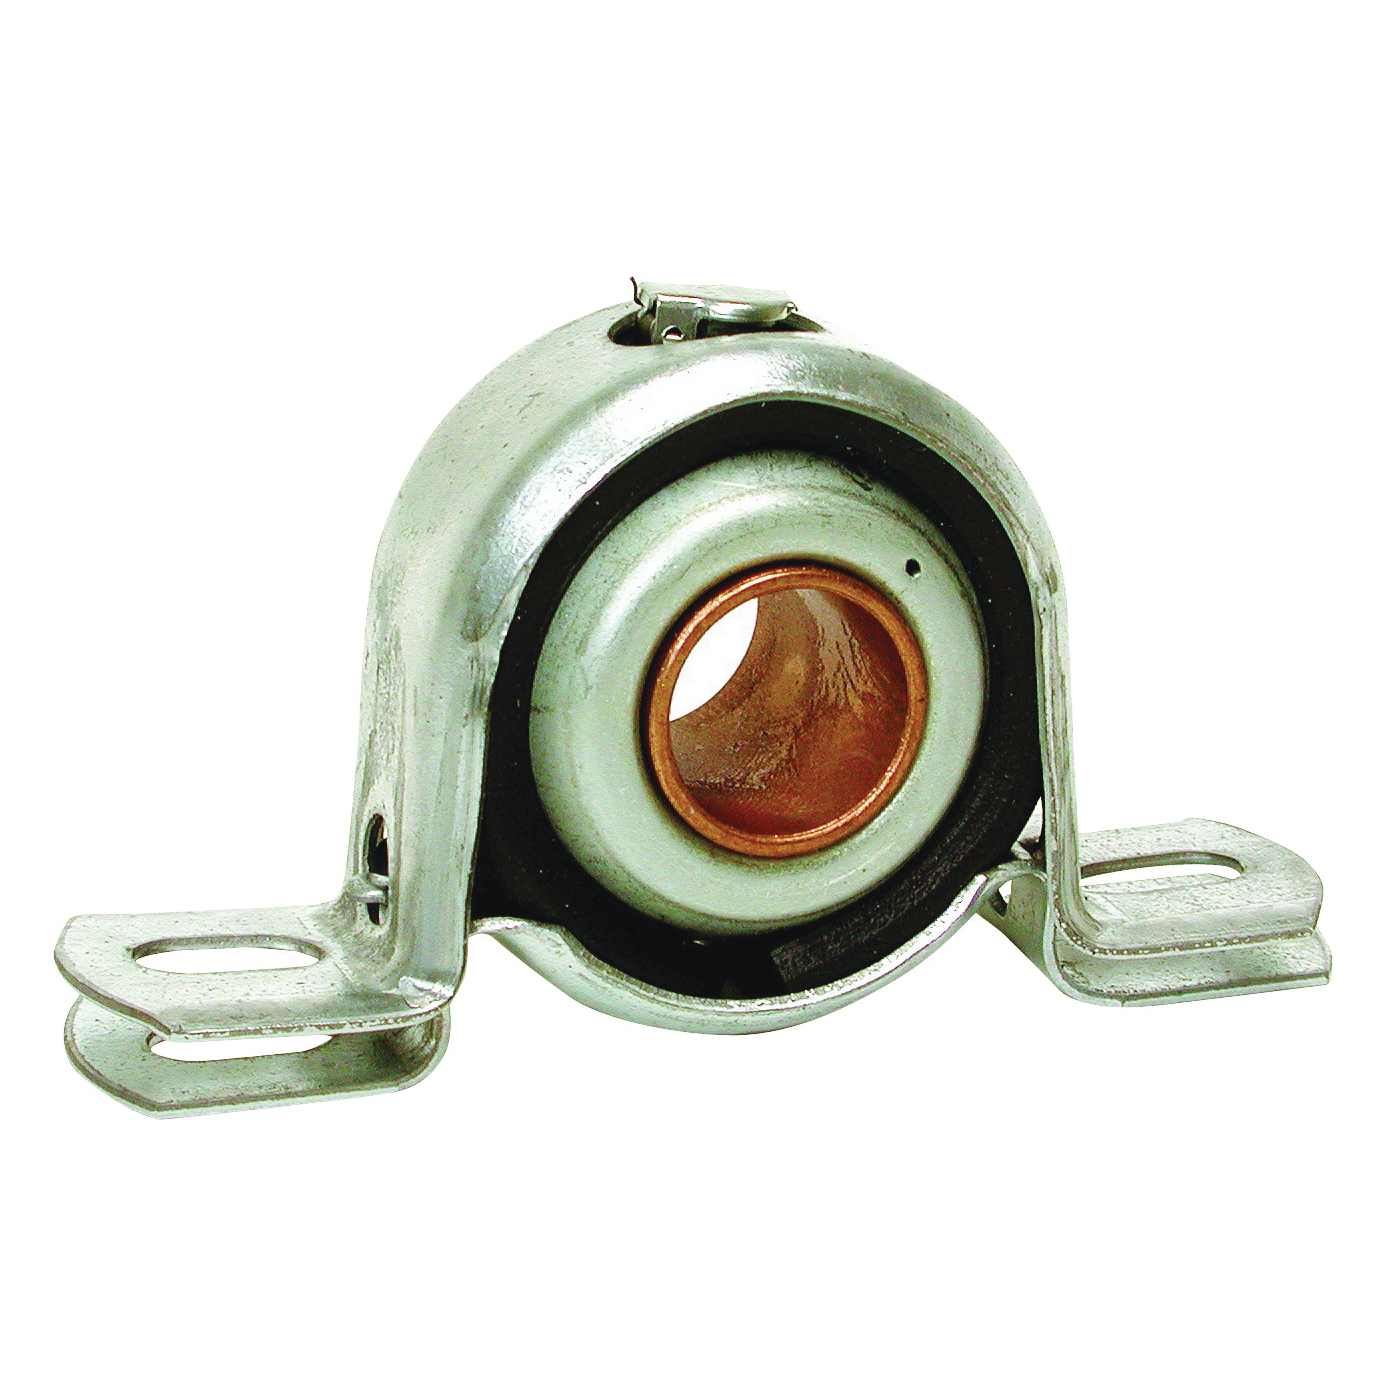 6643 Pillow Block Bearing, For: Evaporative Cooler Purge Systems